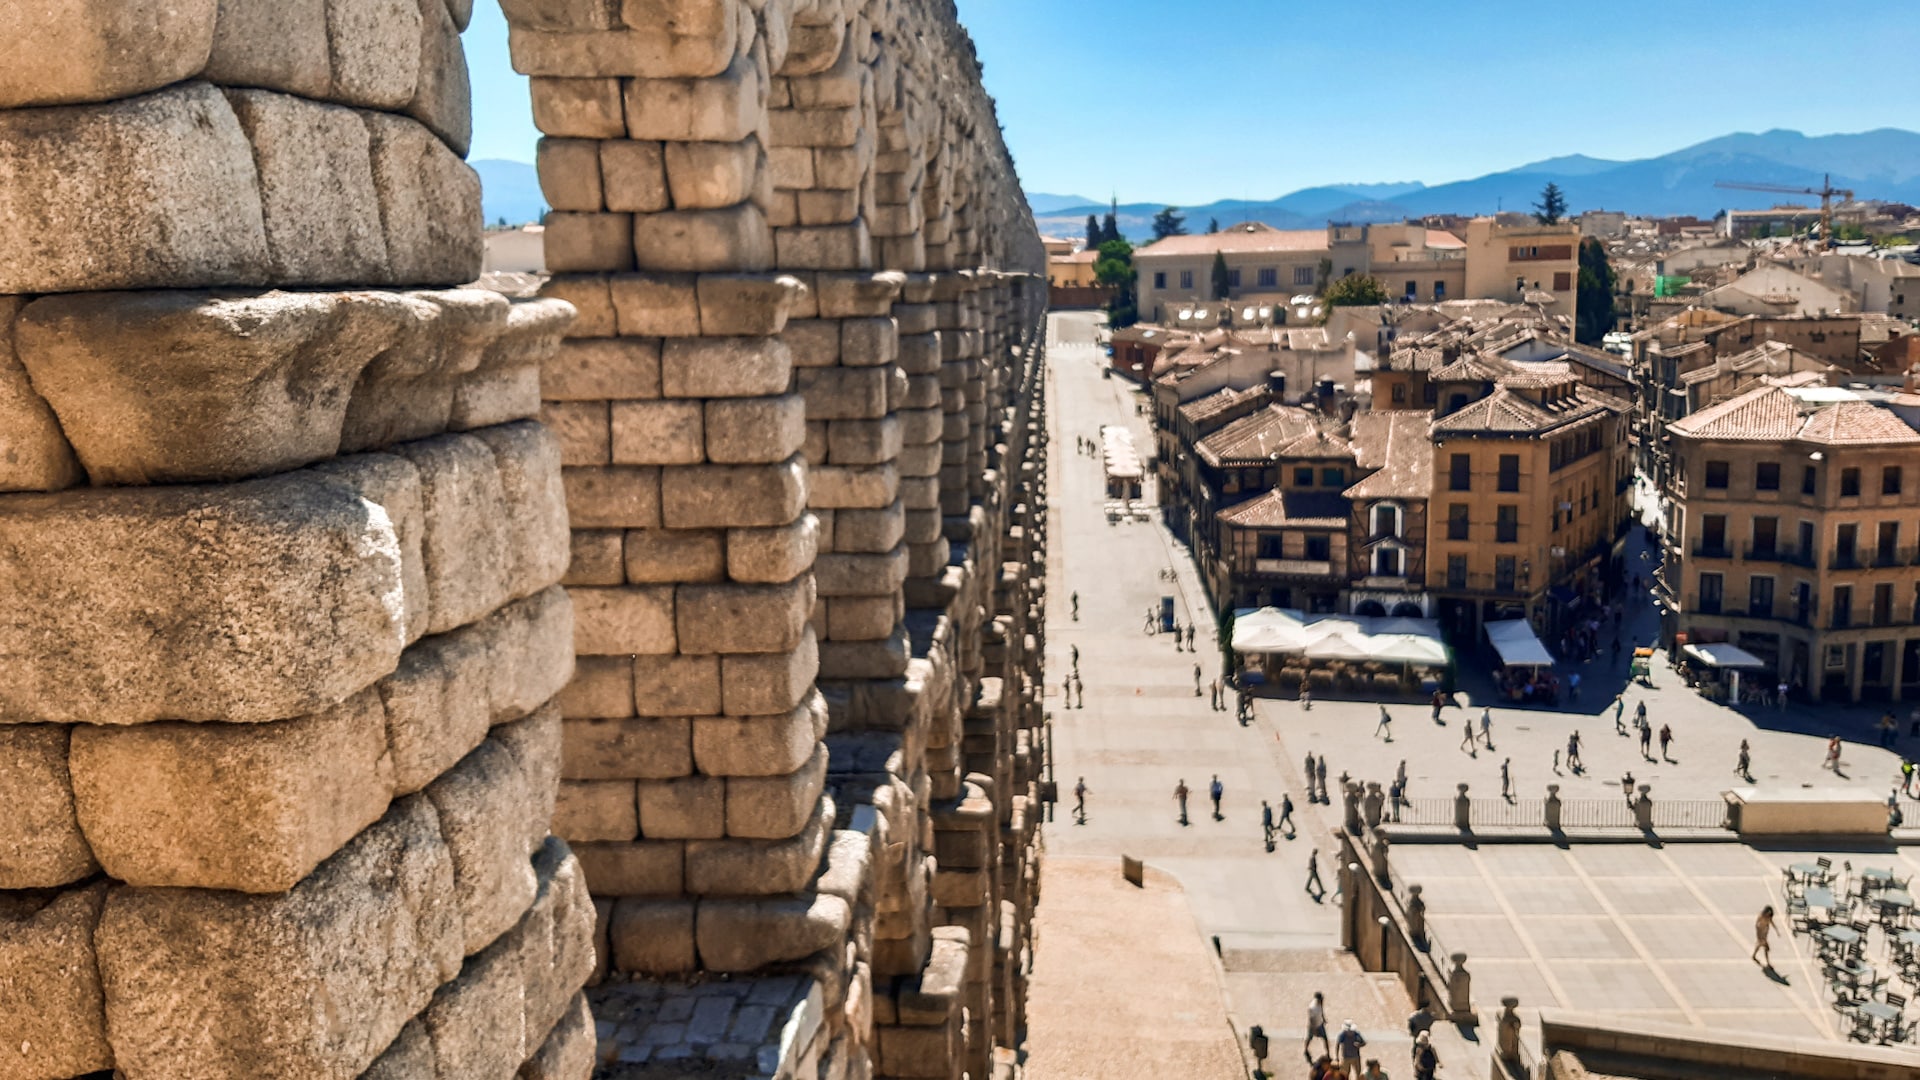 Centro Histórico is the heart of Segovia, filled with beautiful old buildings and rich history.